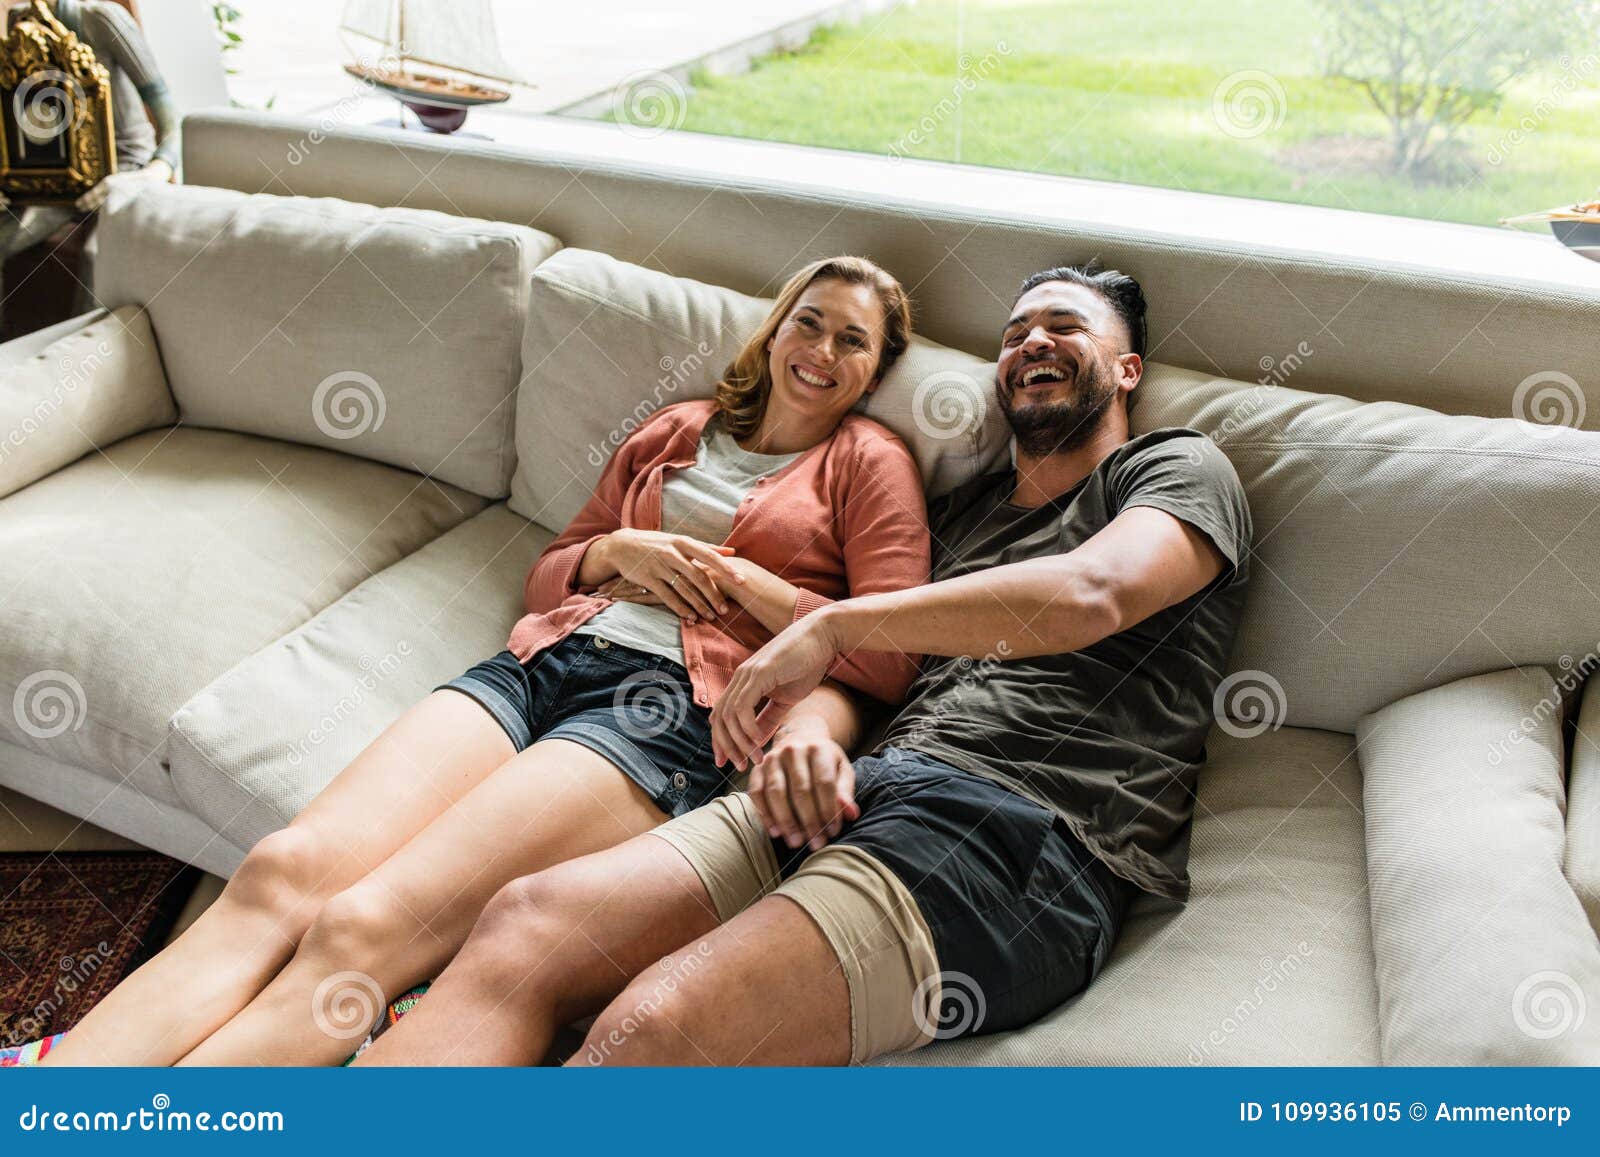 Smiling Young Couple Relaxing On Sofa Stock Image Image Of Smiling Young 109936105